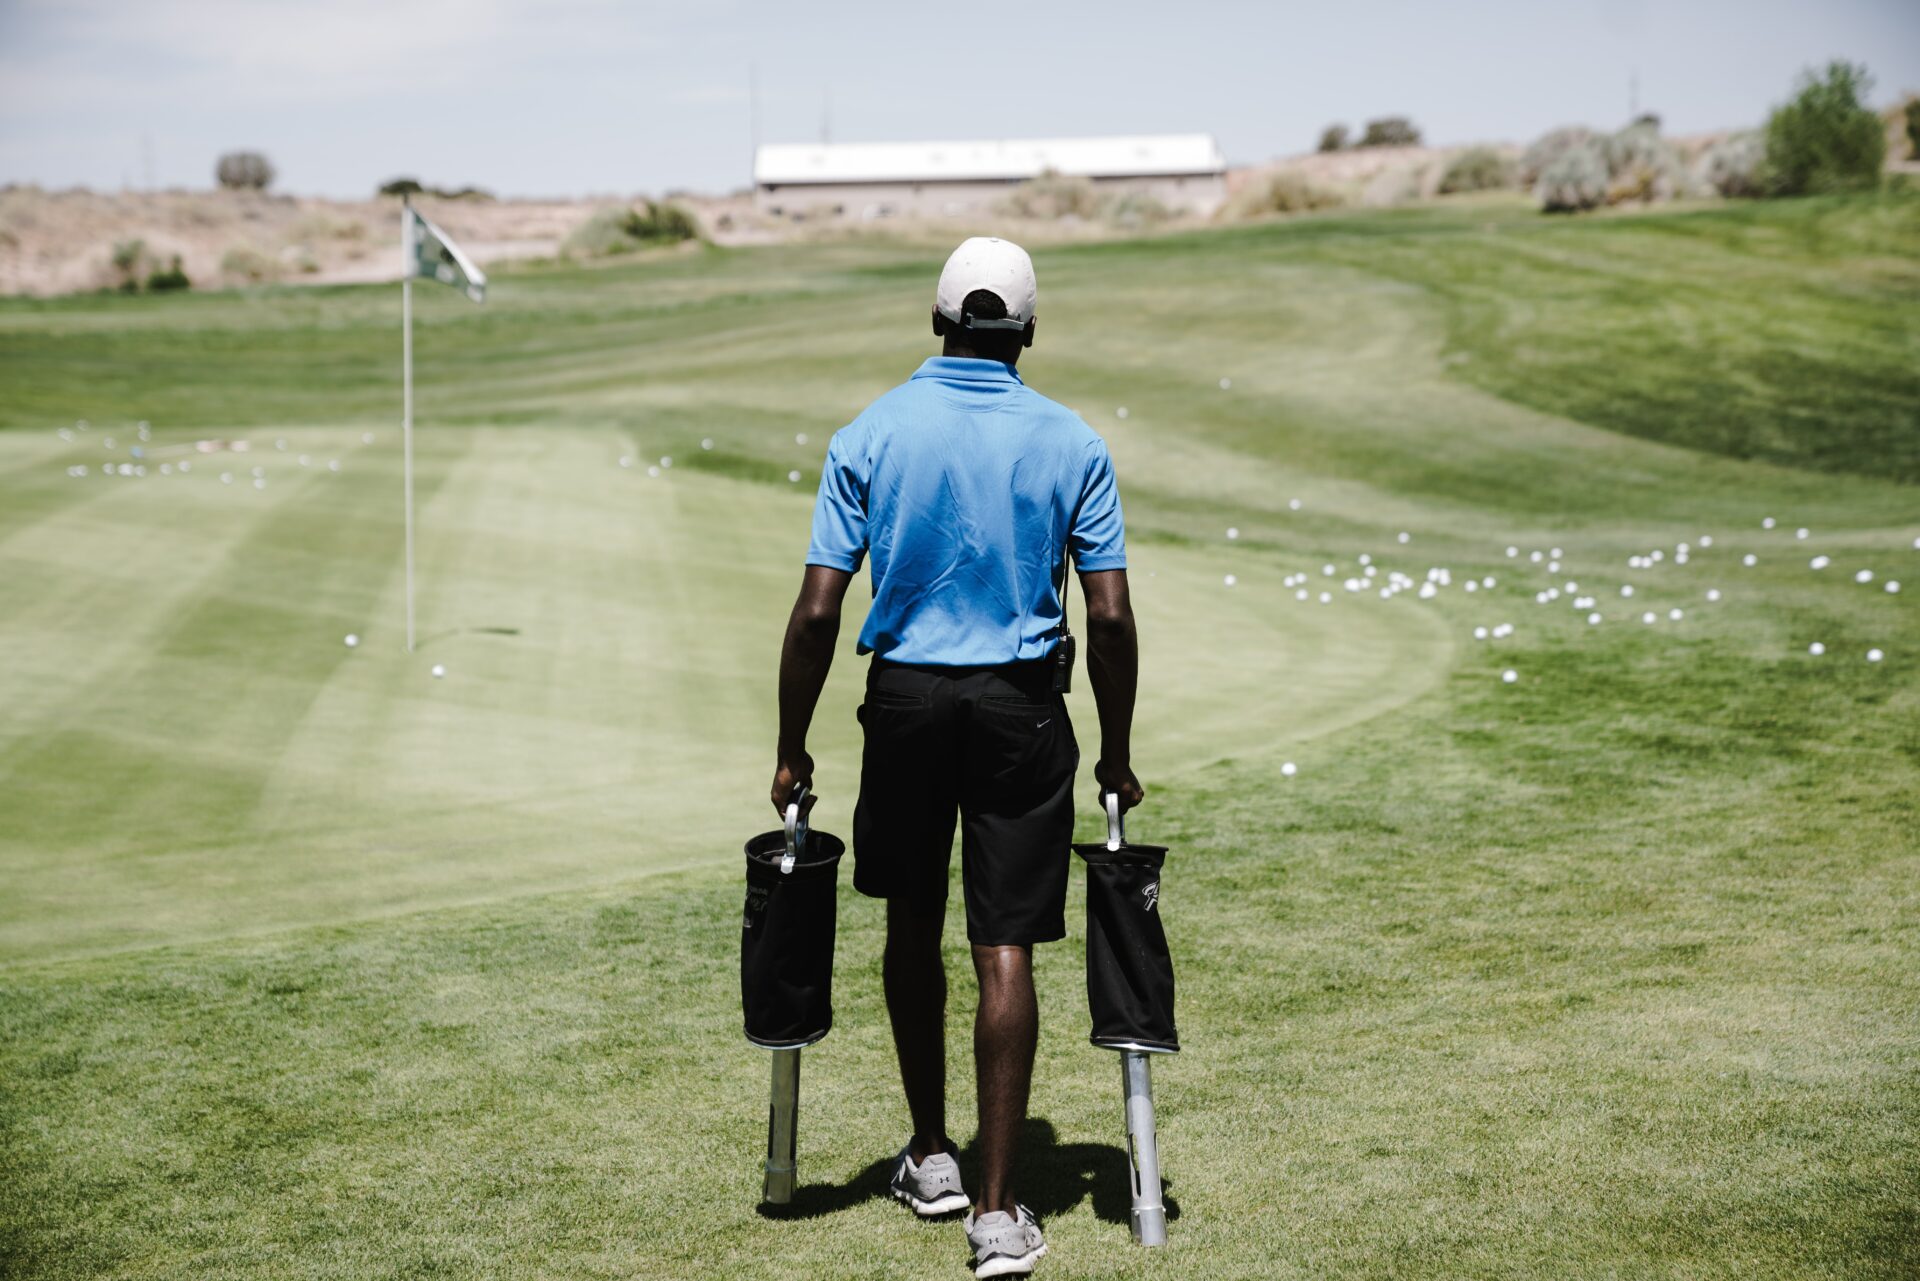 The Ultimate Golf Warm Up: Preparing for Peak Performance